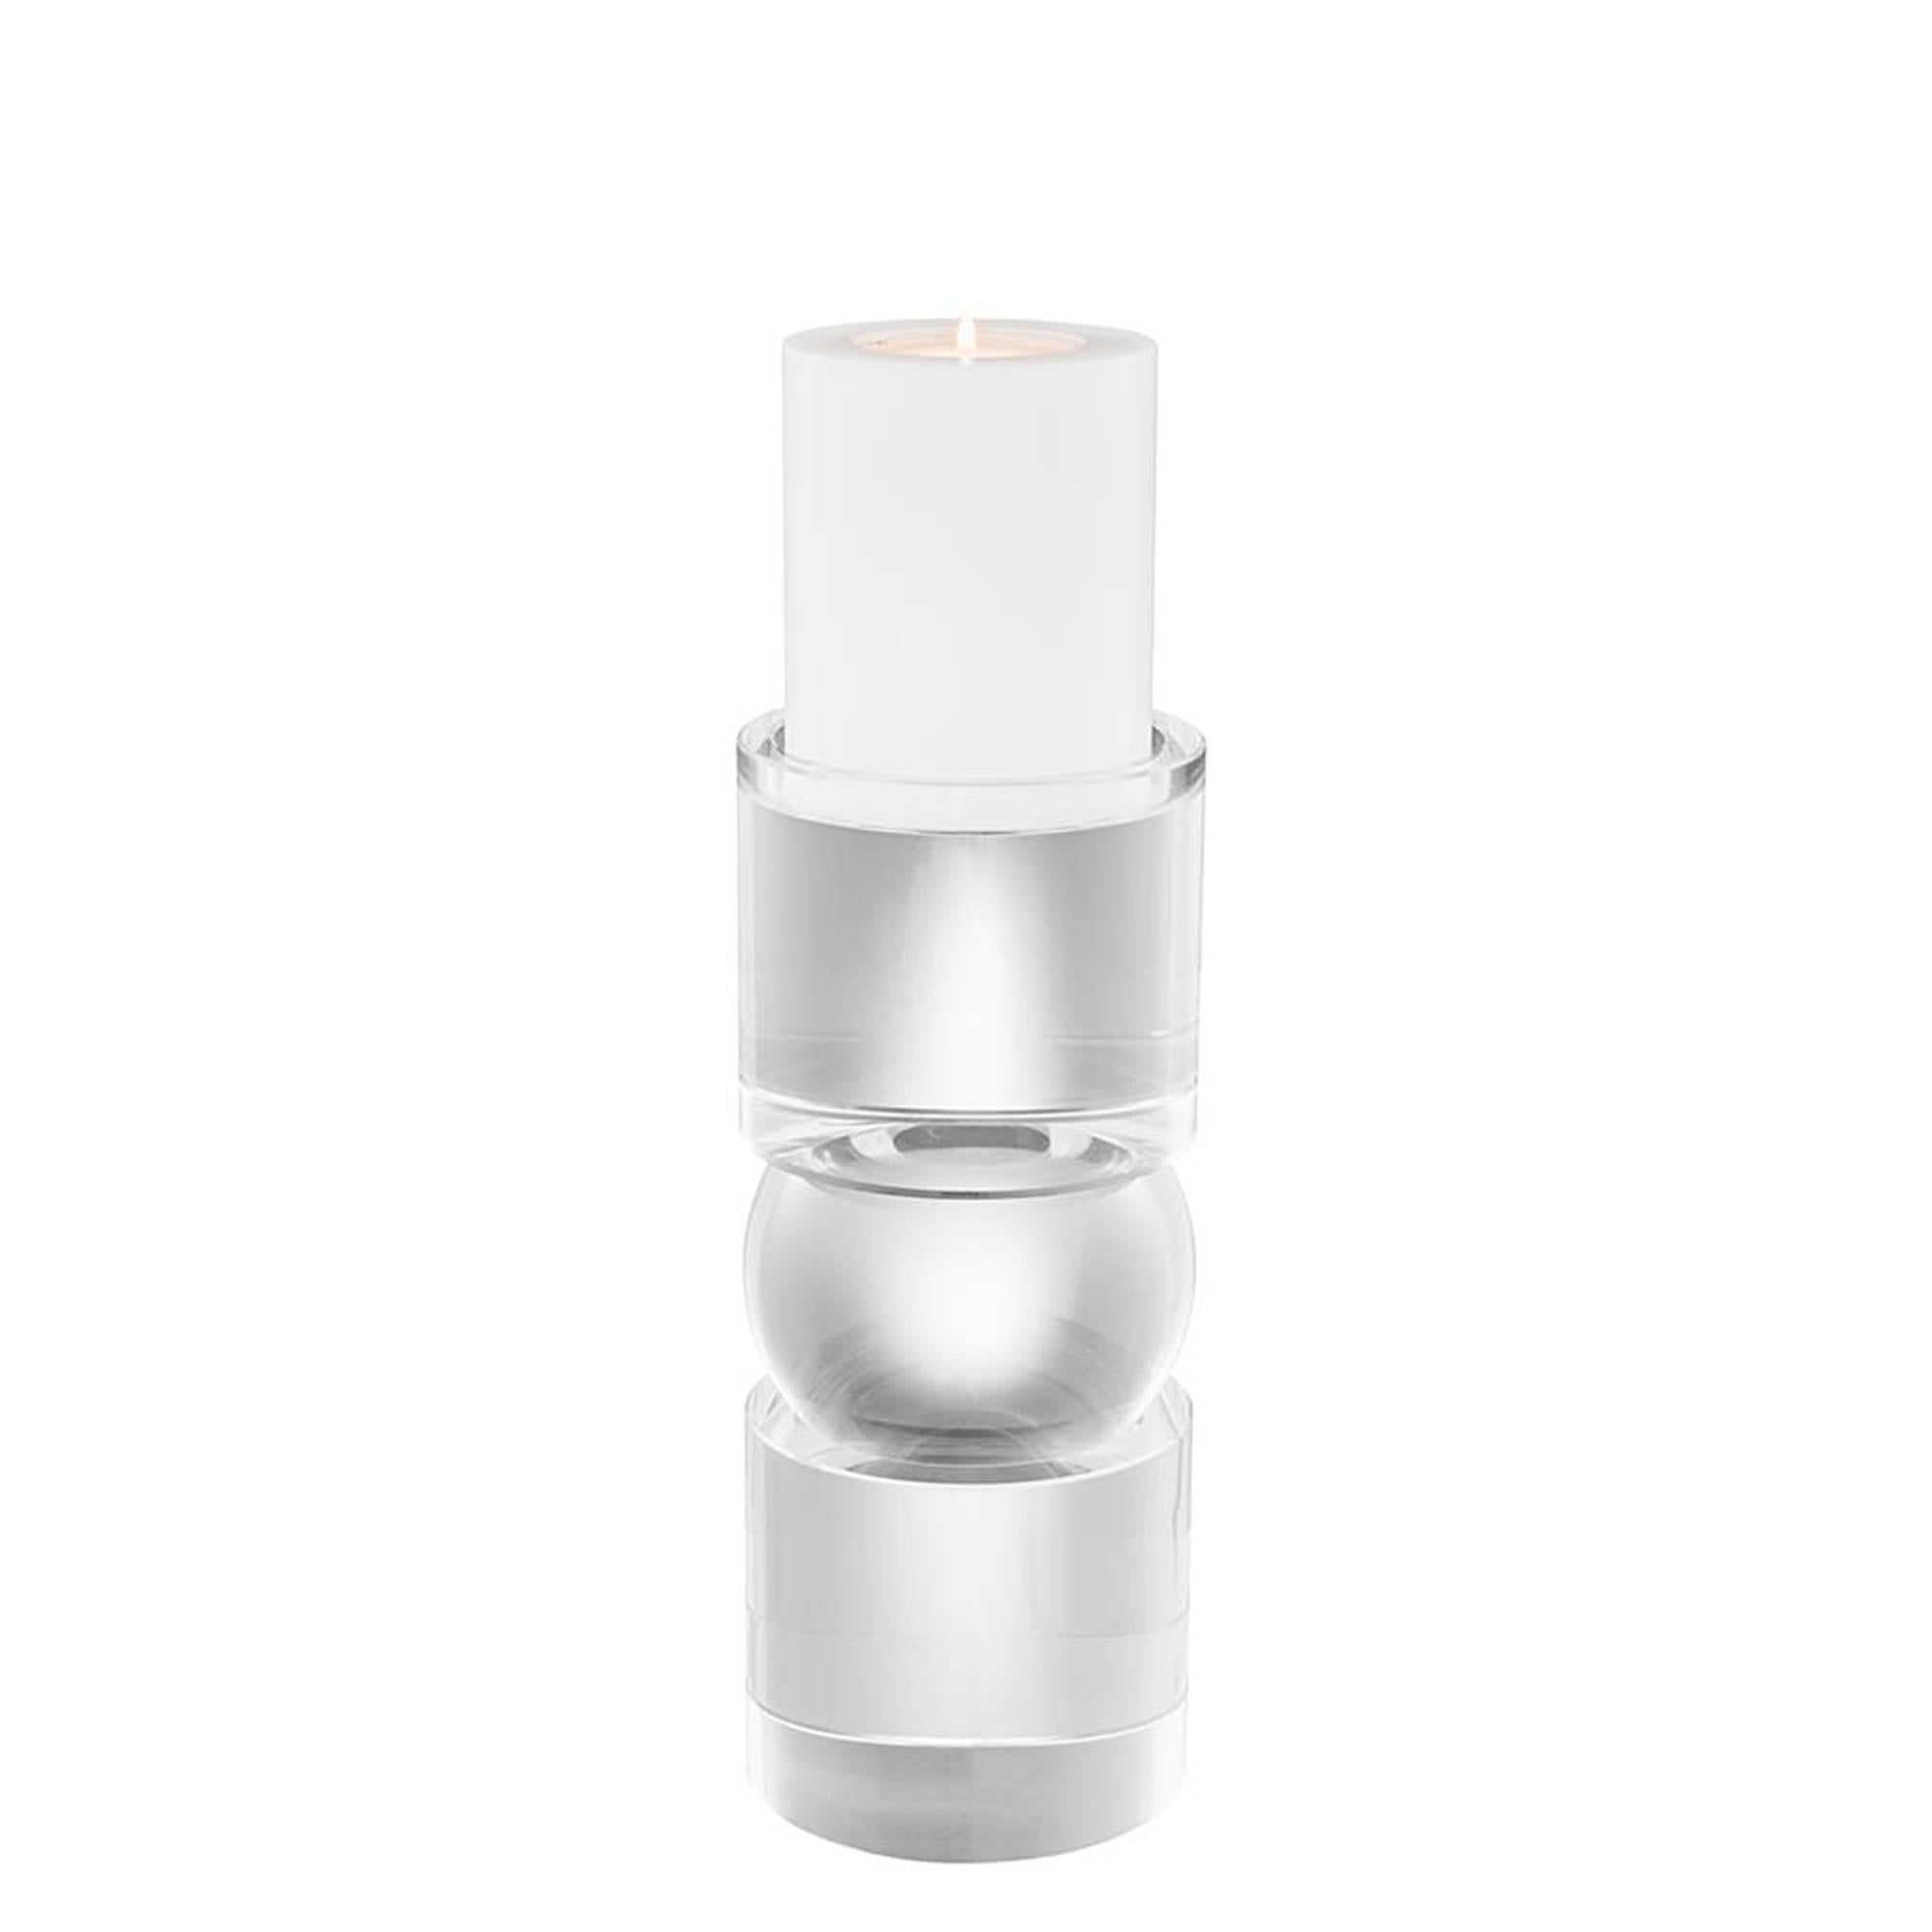 Candleholder pearl in crystal glass.
Available in Ø12.5 x H 36cm, price: 790,00€.
